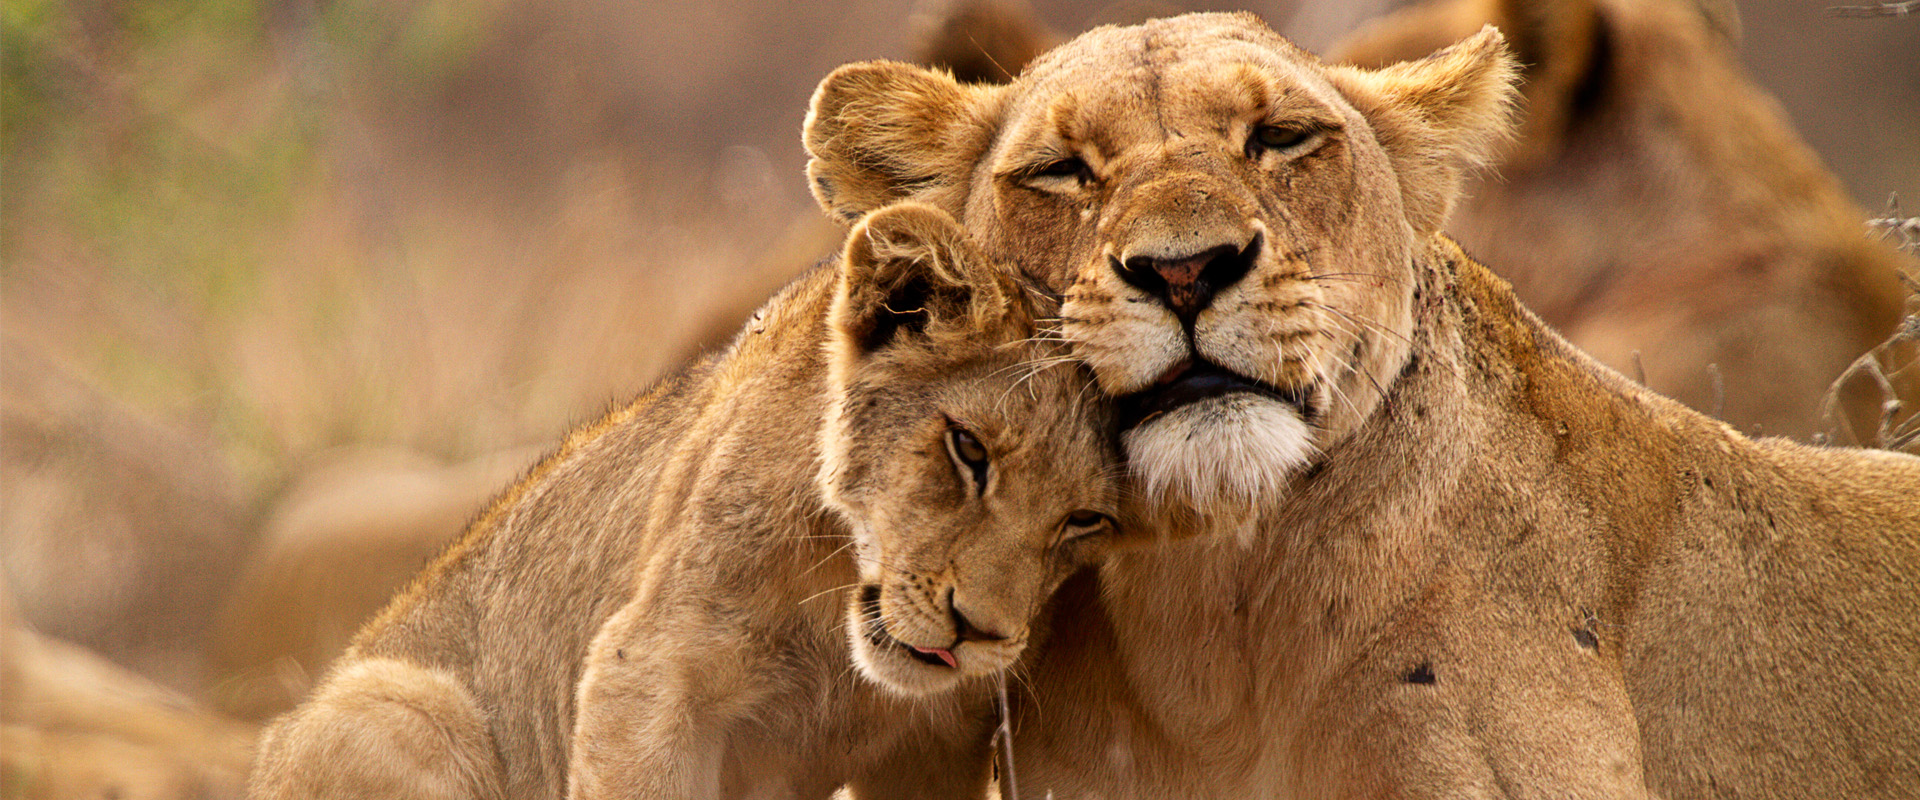 Lioness and cub nuzzling in with each other